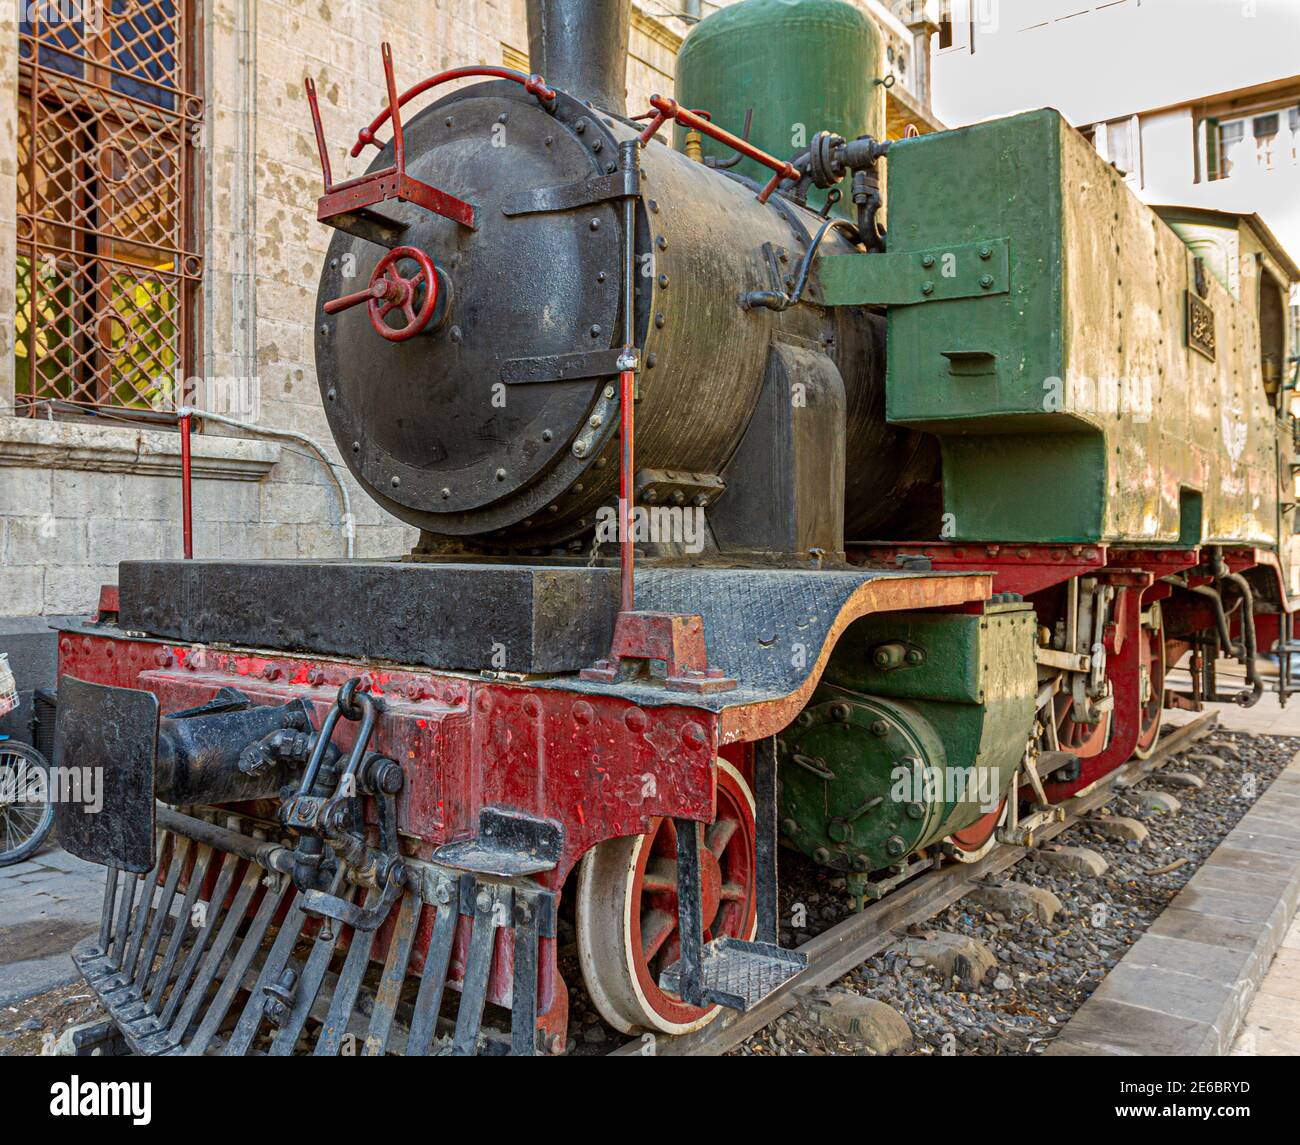 Historic locomotive dating back to 19th century seen on display in front of the famous former Hejaz Railway Station in Damascus, Syria. This station p Stock Photo